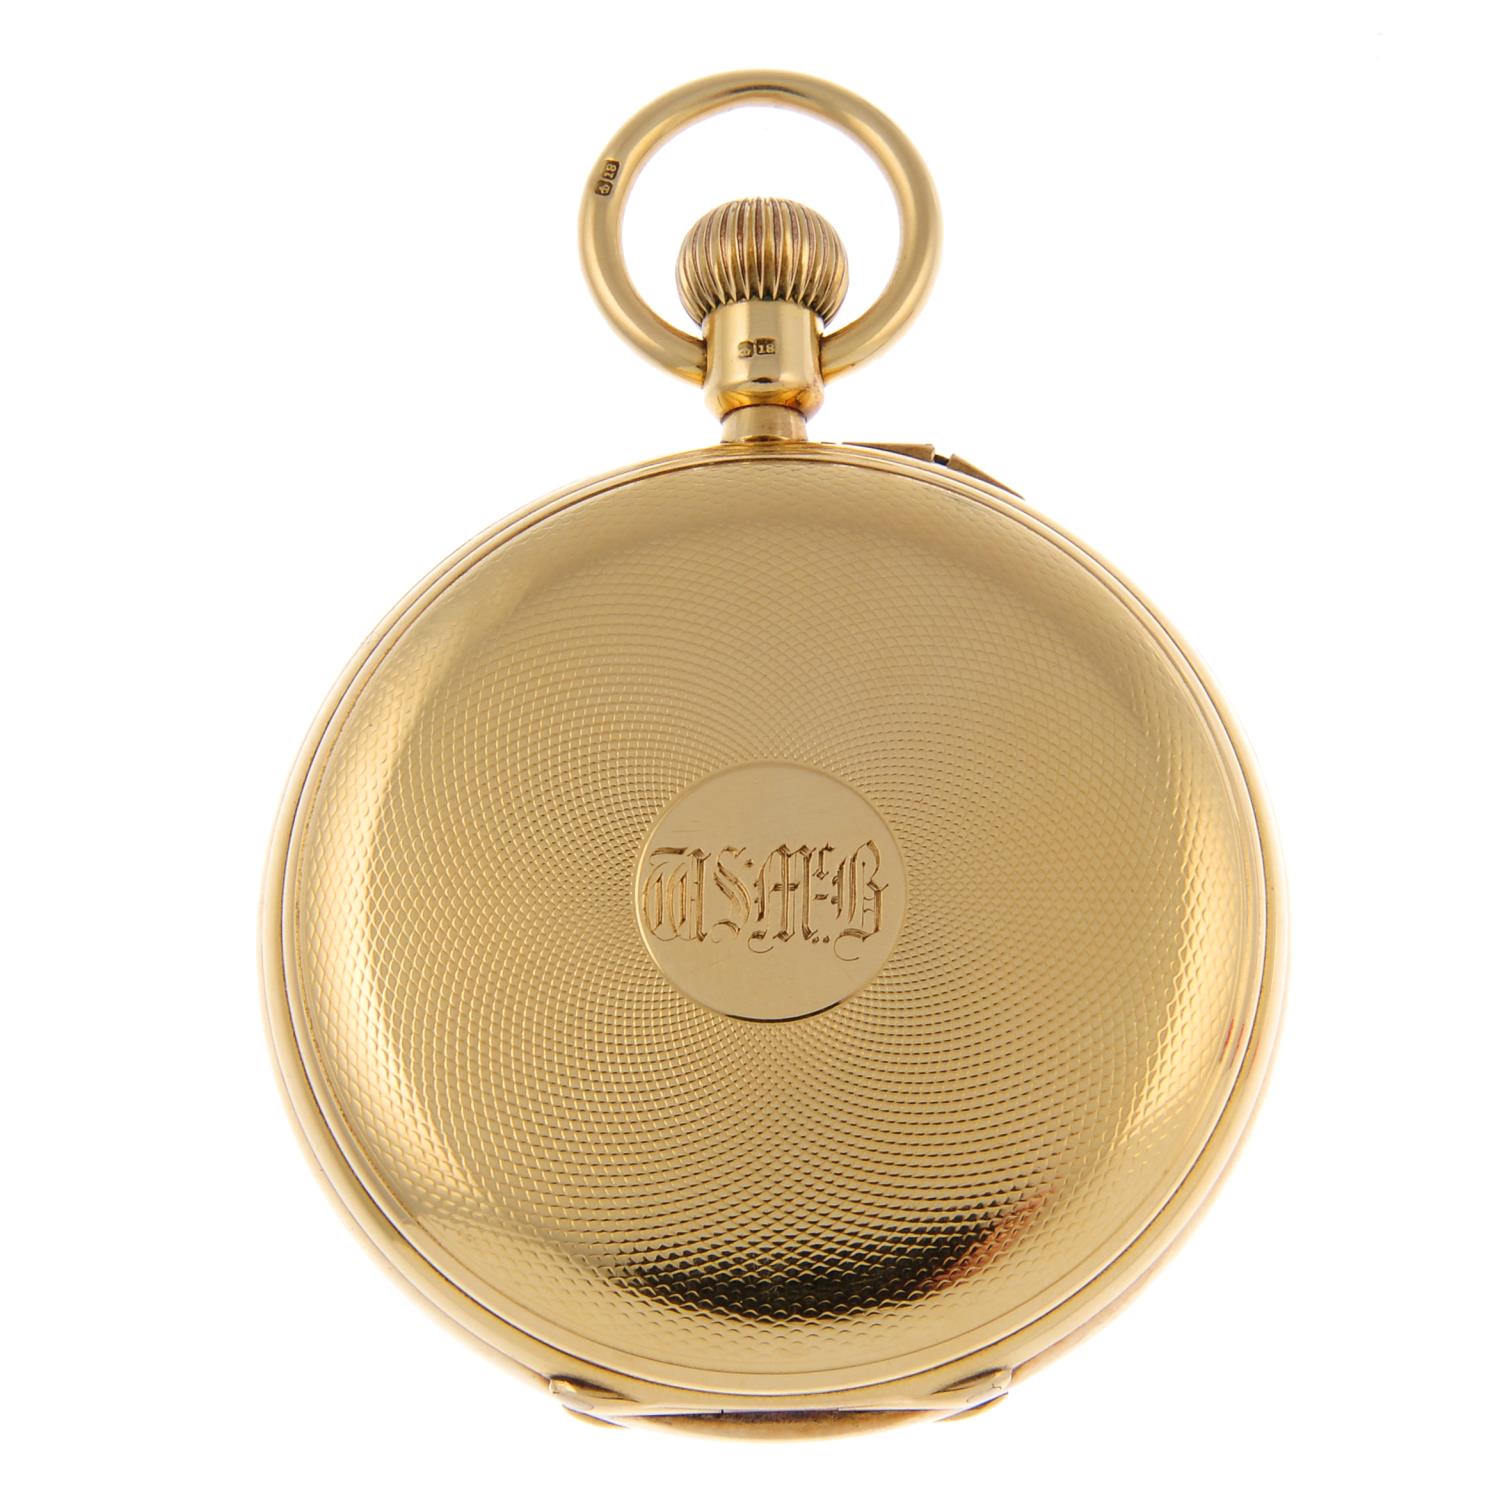 A full hunter pocket watch by E. - Image 2 of 4